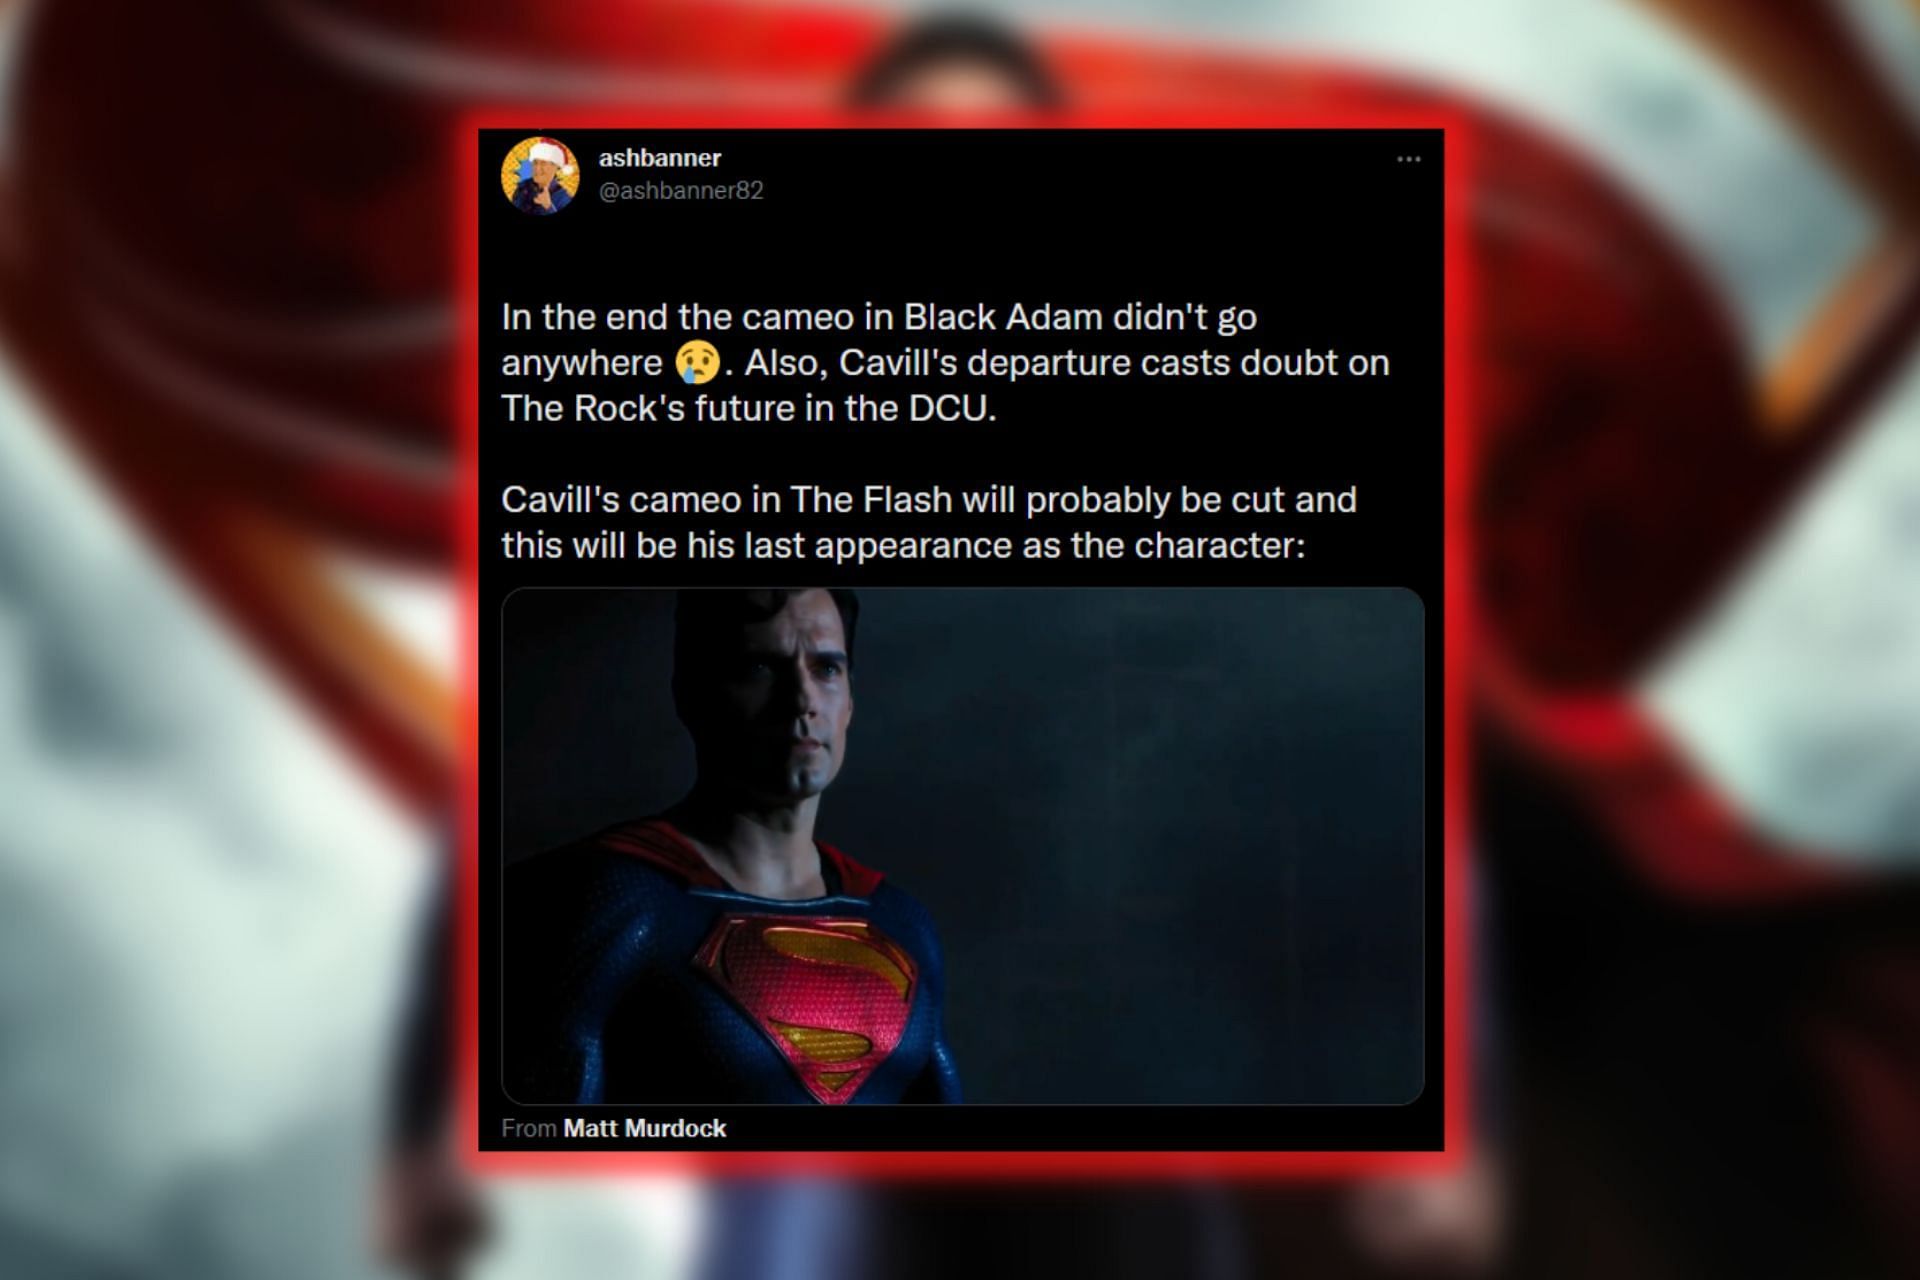 Henry Cavill is not Superman anymore, hurt fans go back to Black